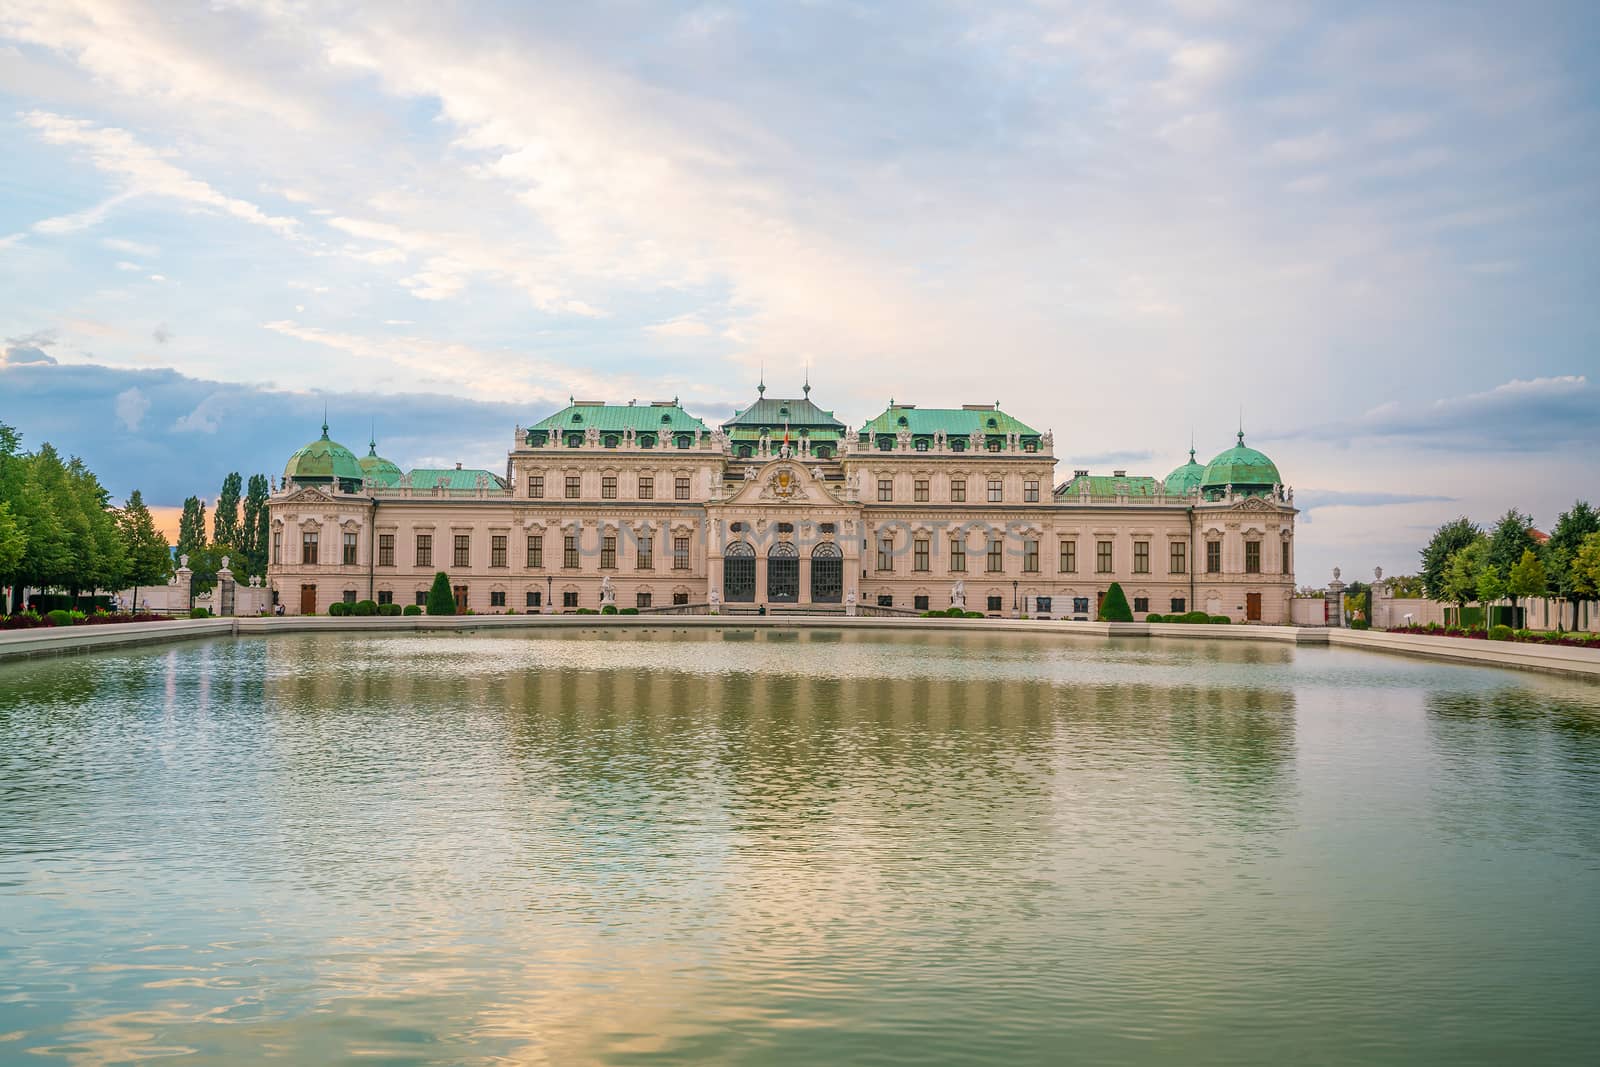 Vienna Belvedere Palace and the gardens at sunset in Austria